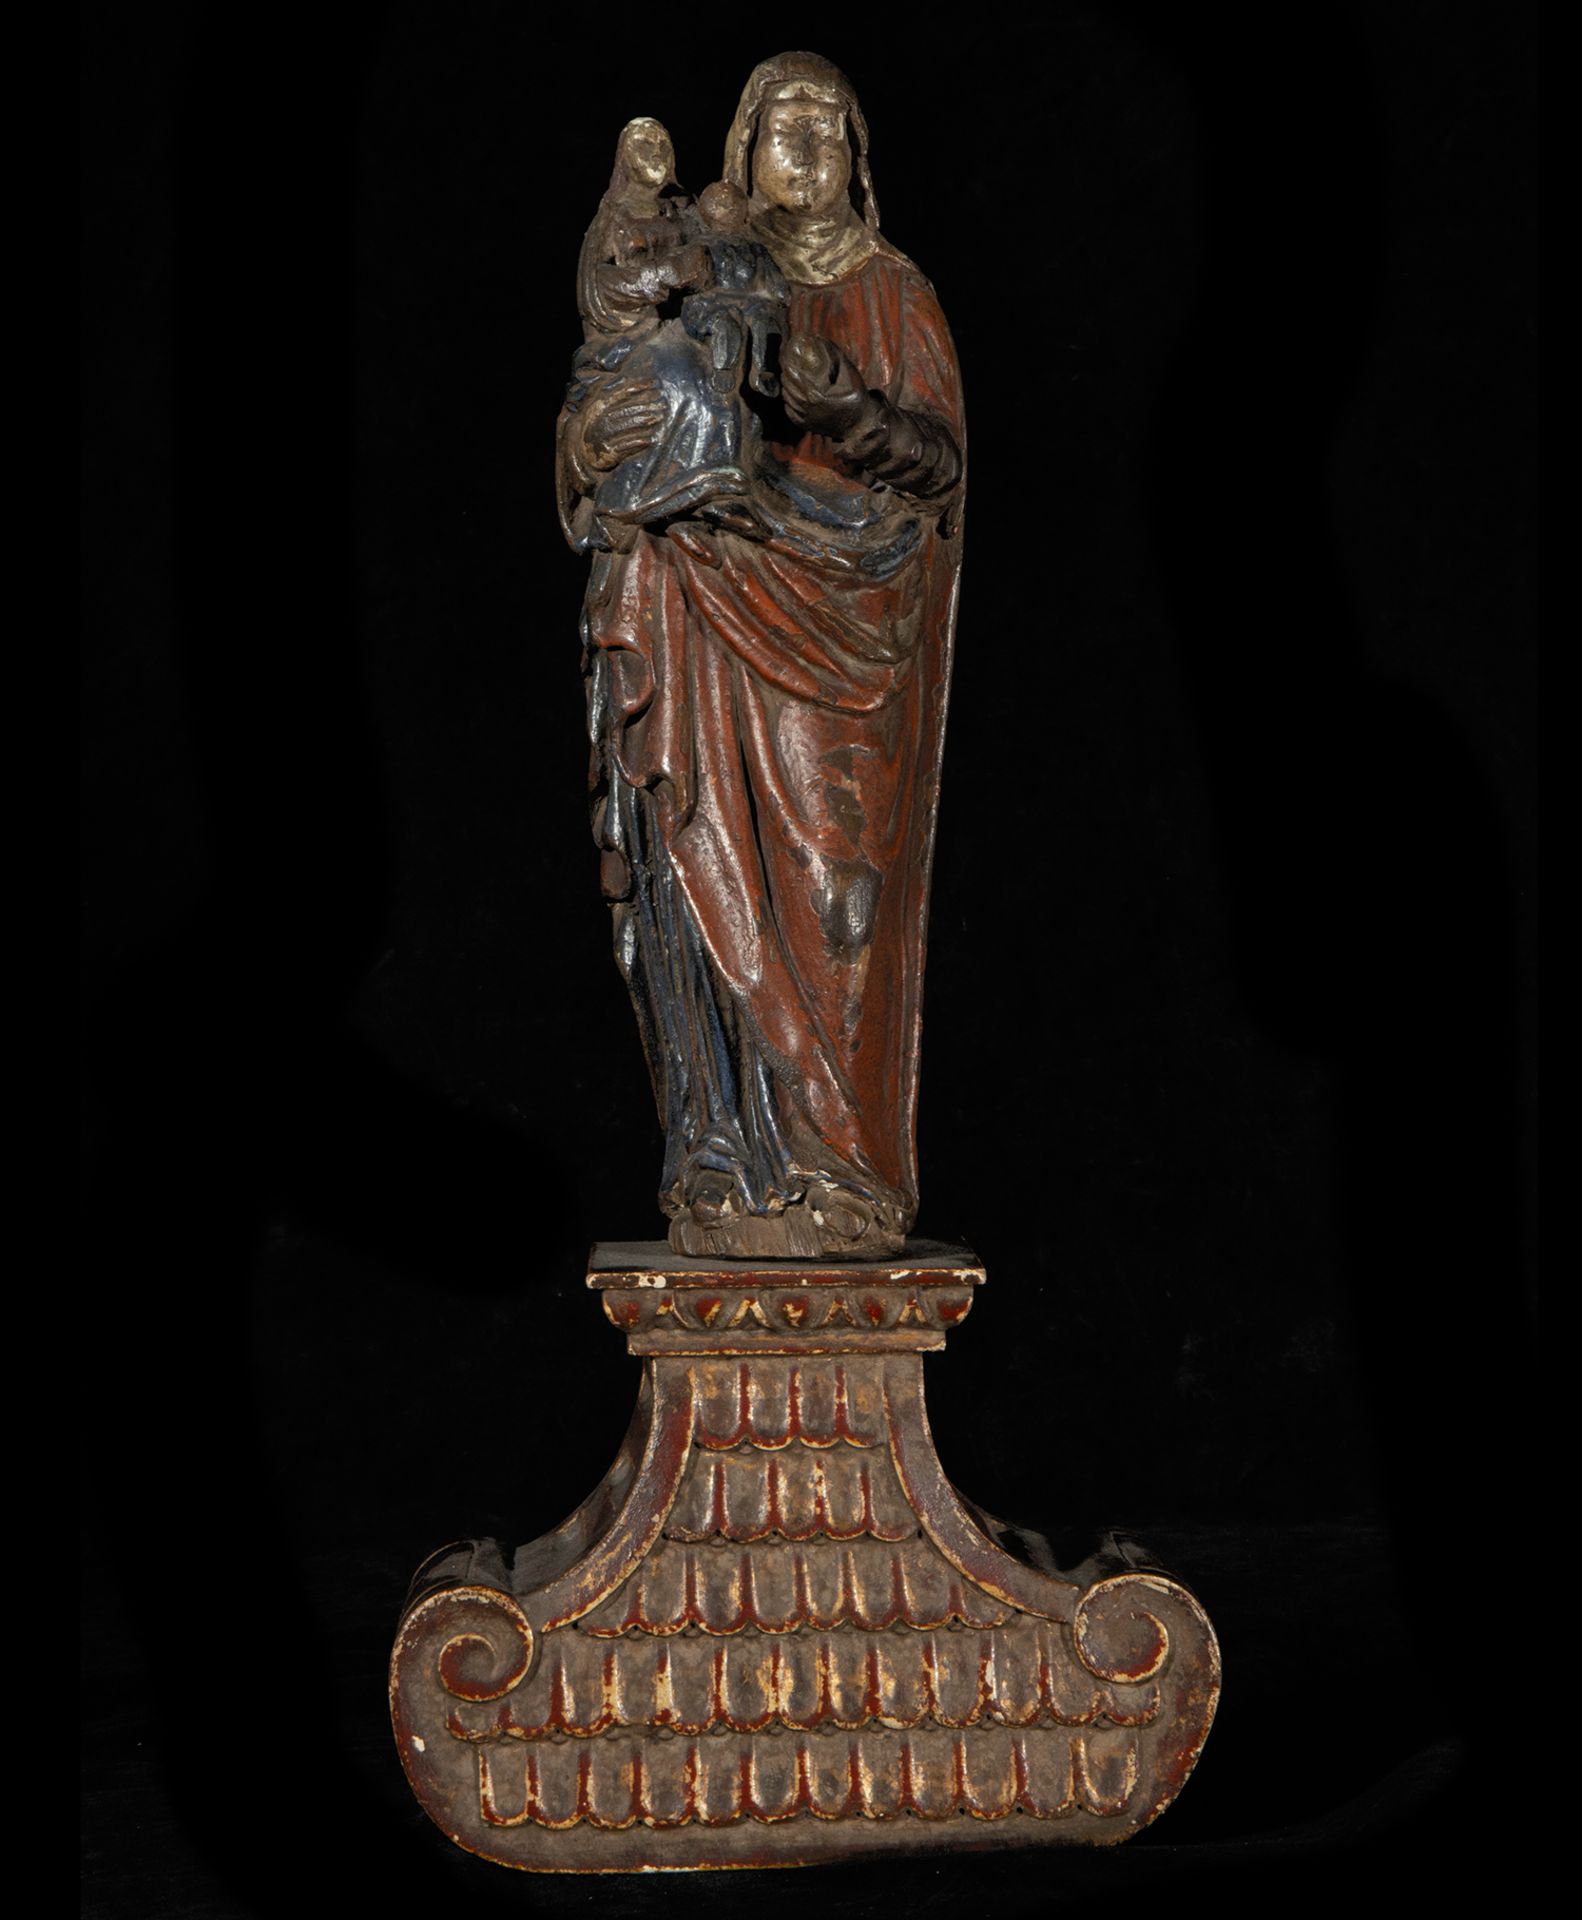 Portuguese Late Gothic Triple Virgin from the end of the 15th century